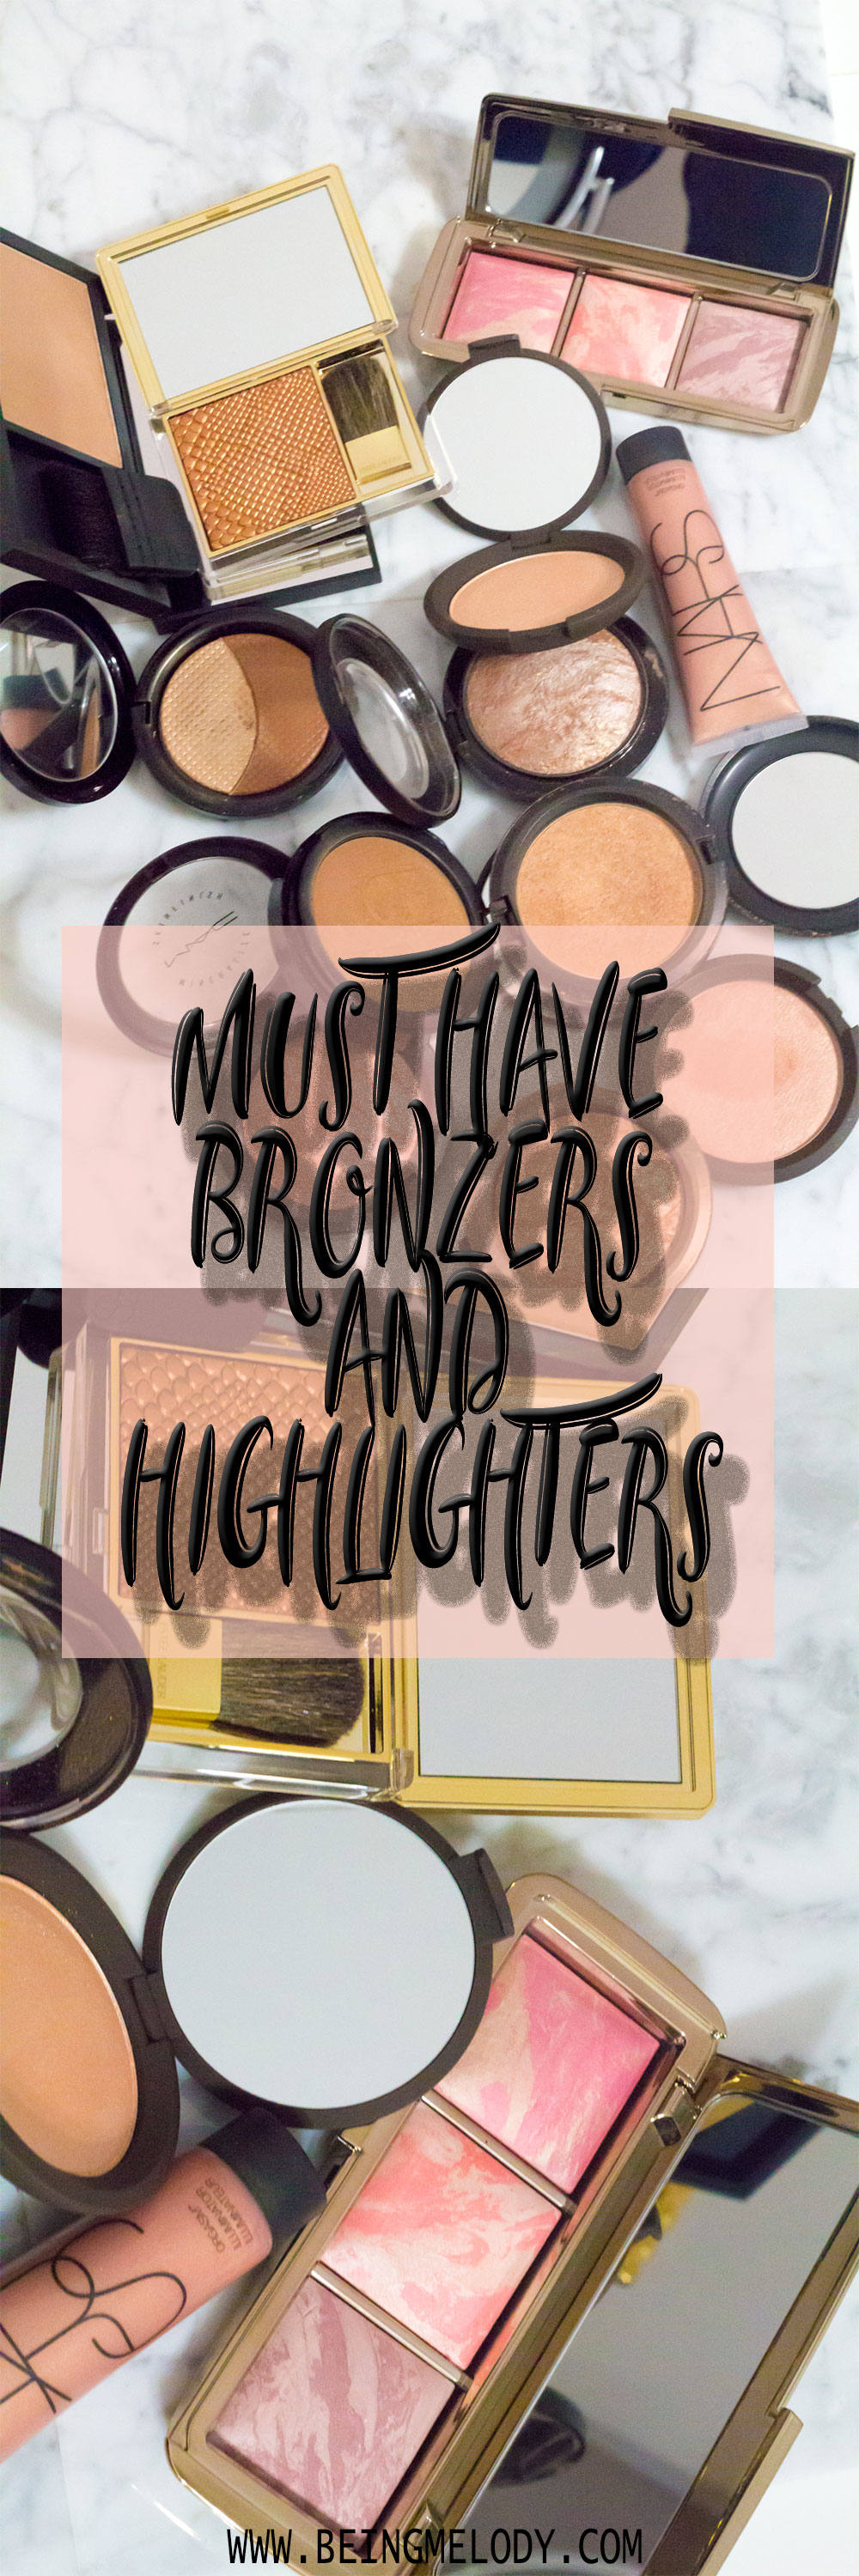 Must Have Bronzers and Highlighters for Every Makeup Collection